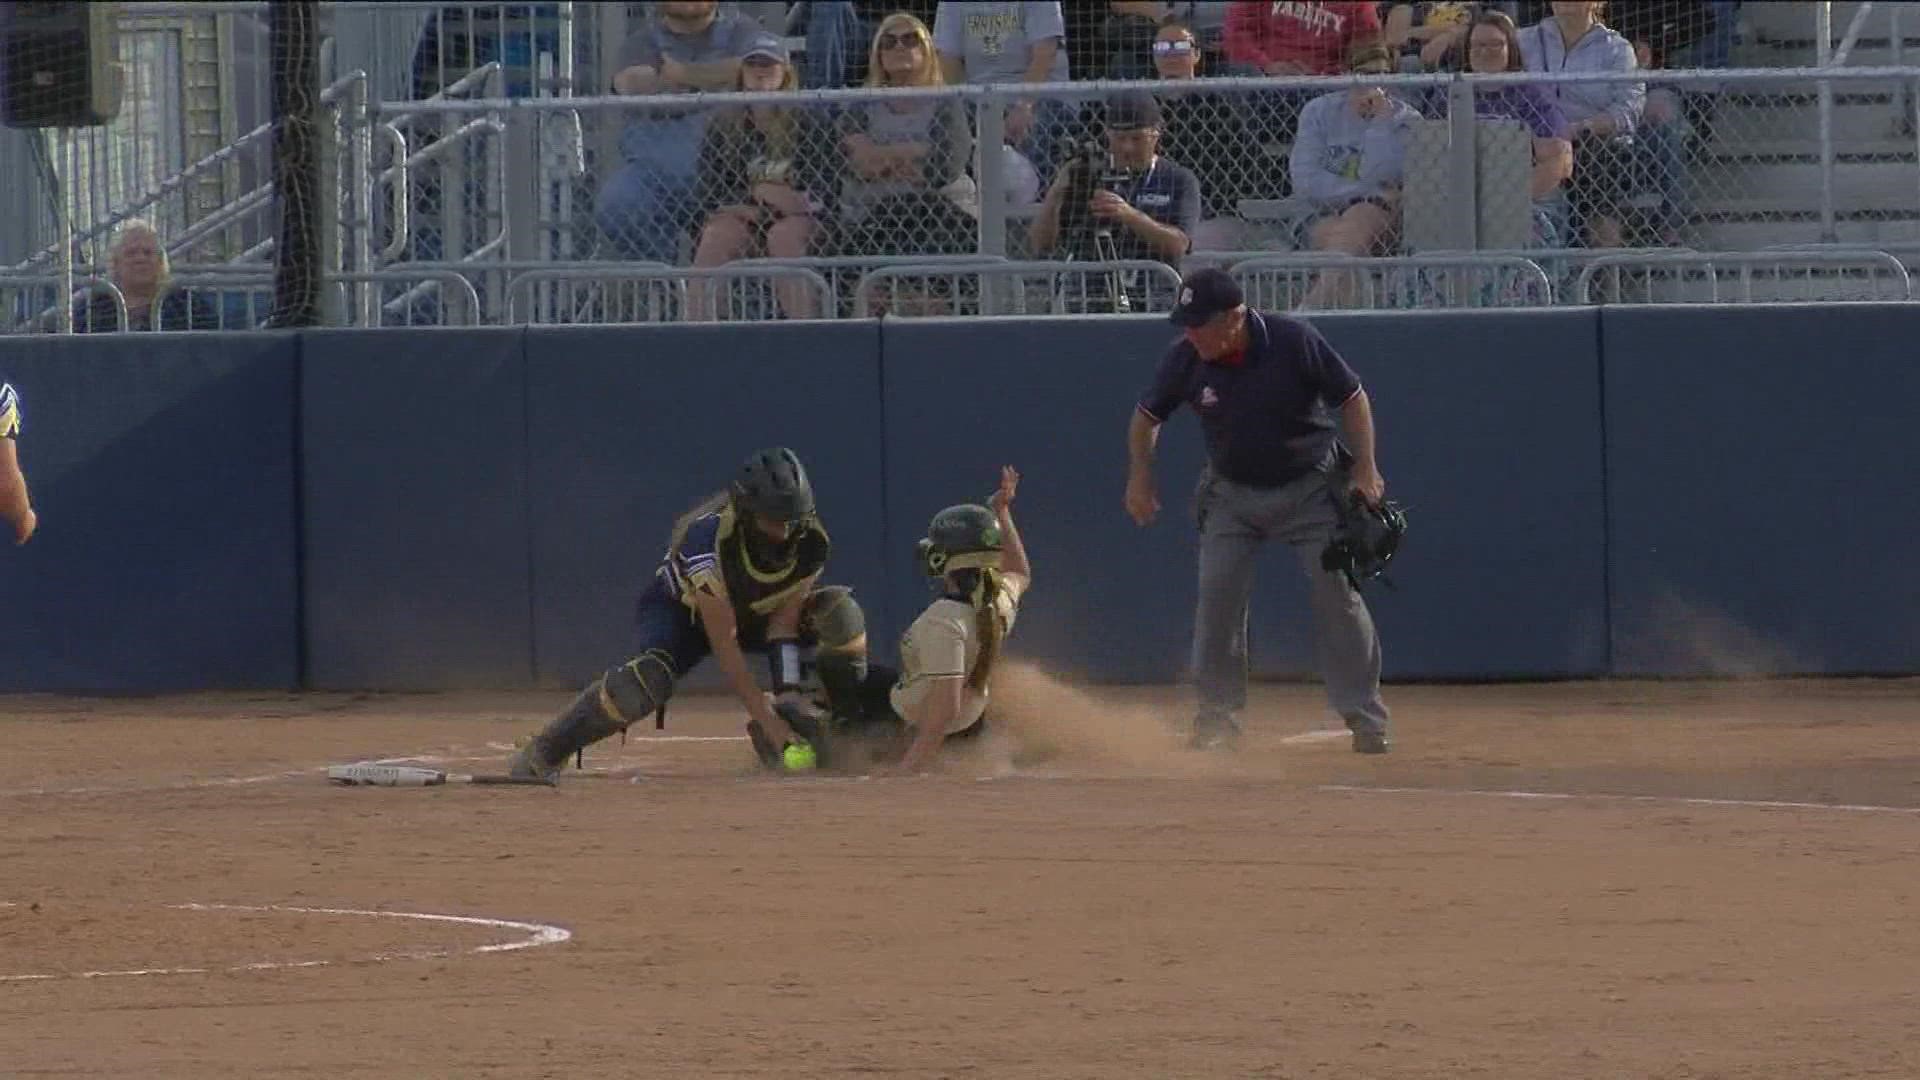 It's high school softball week in our area. Here's a roundup of highlights from the latest matchups as teams chase a championship.